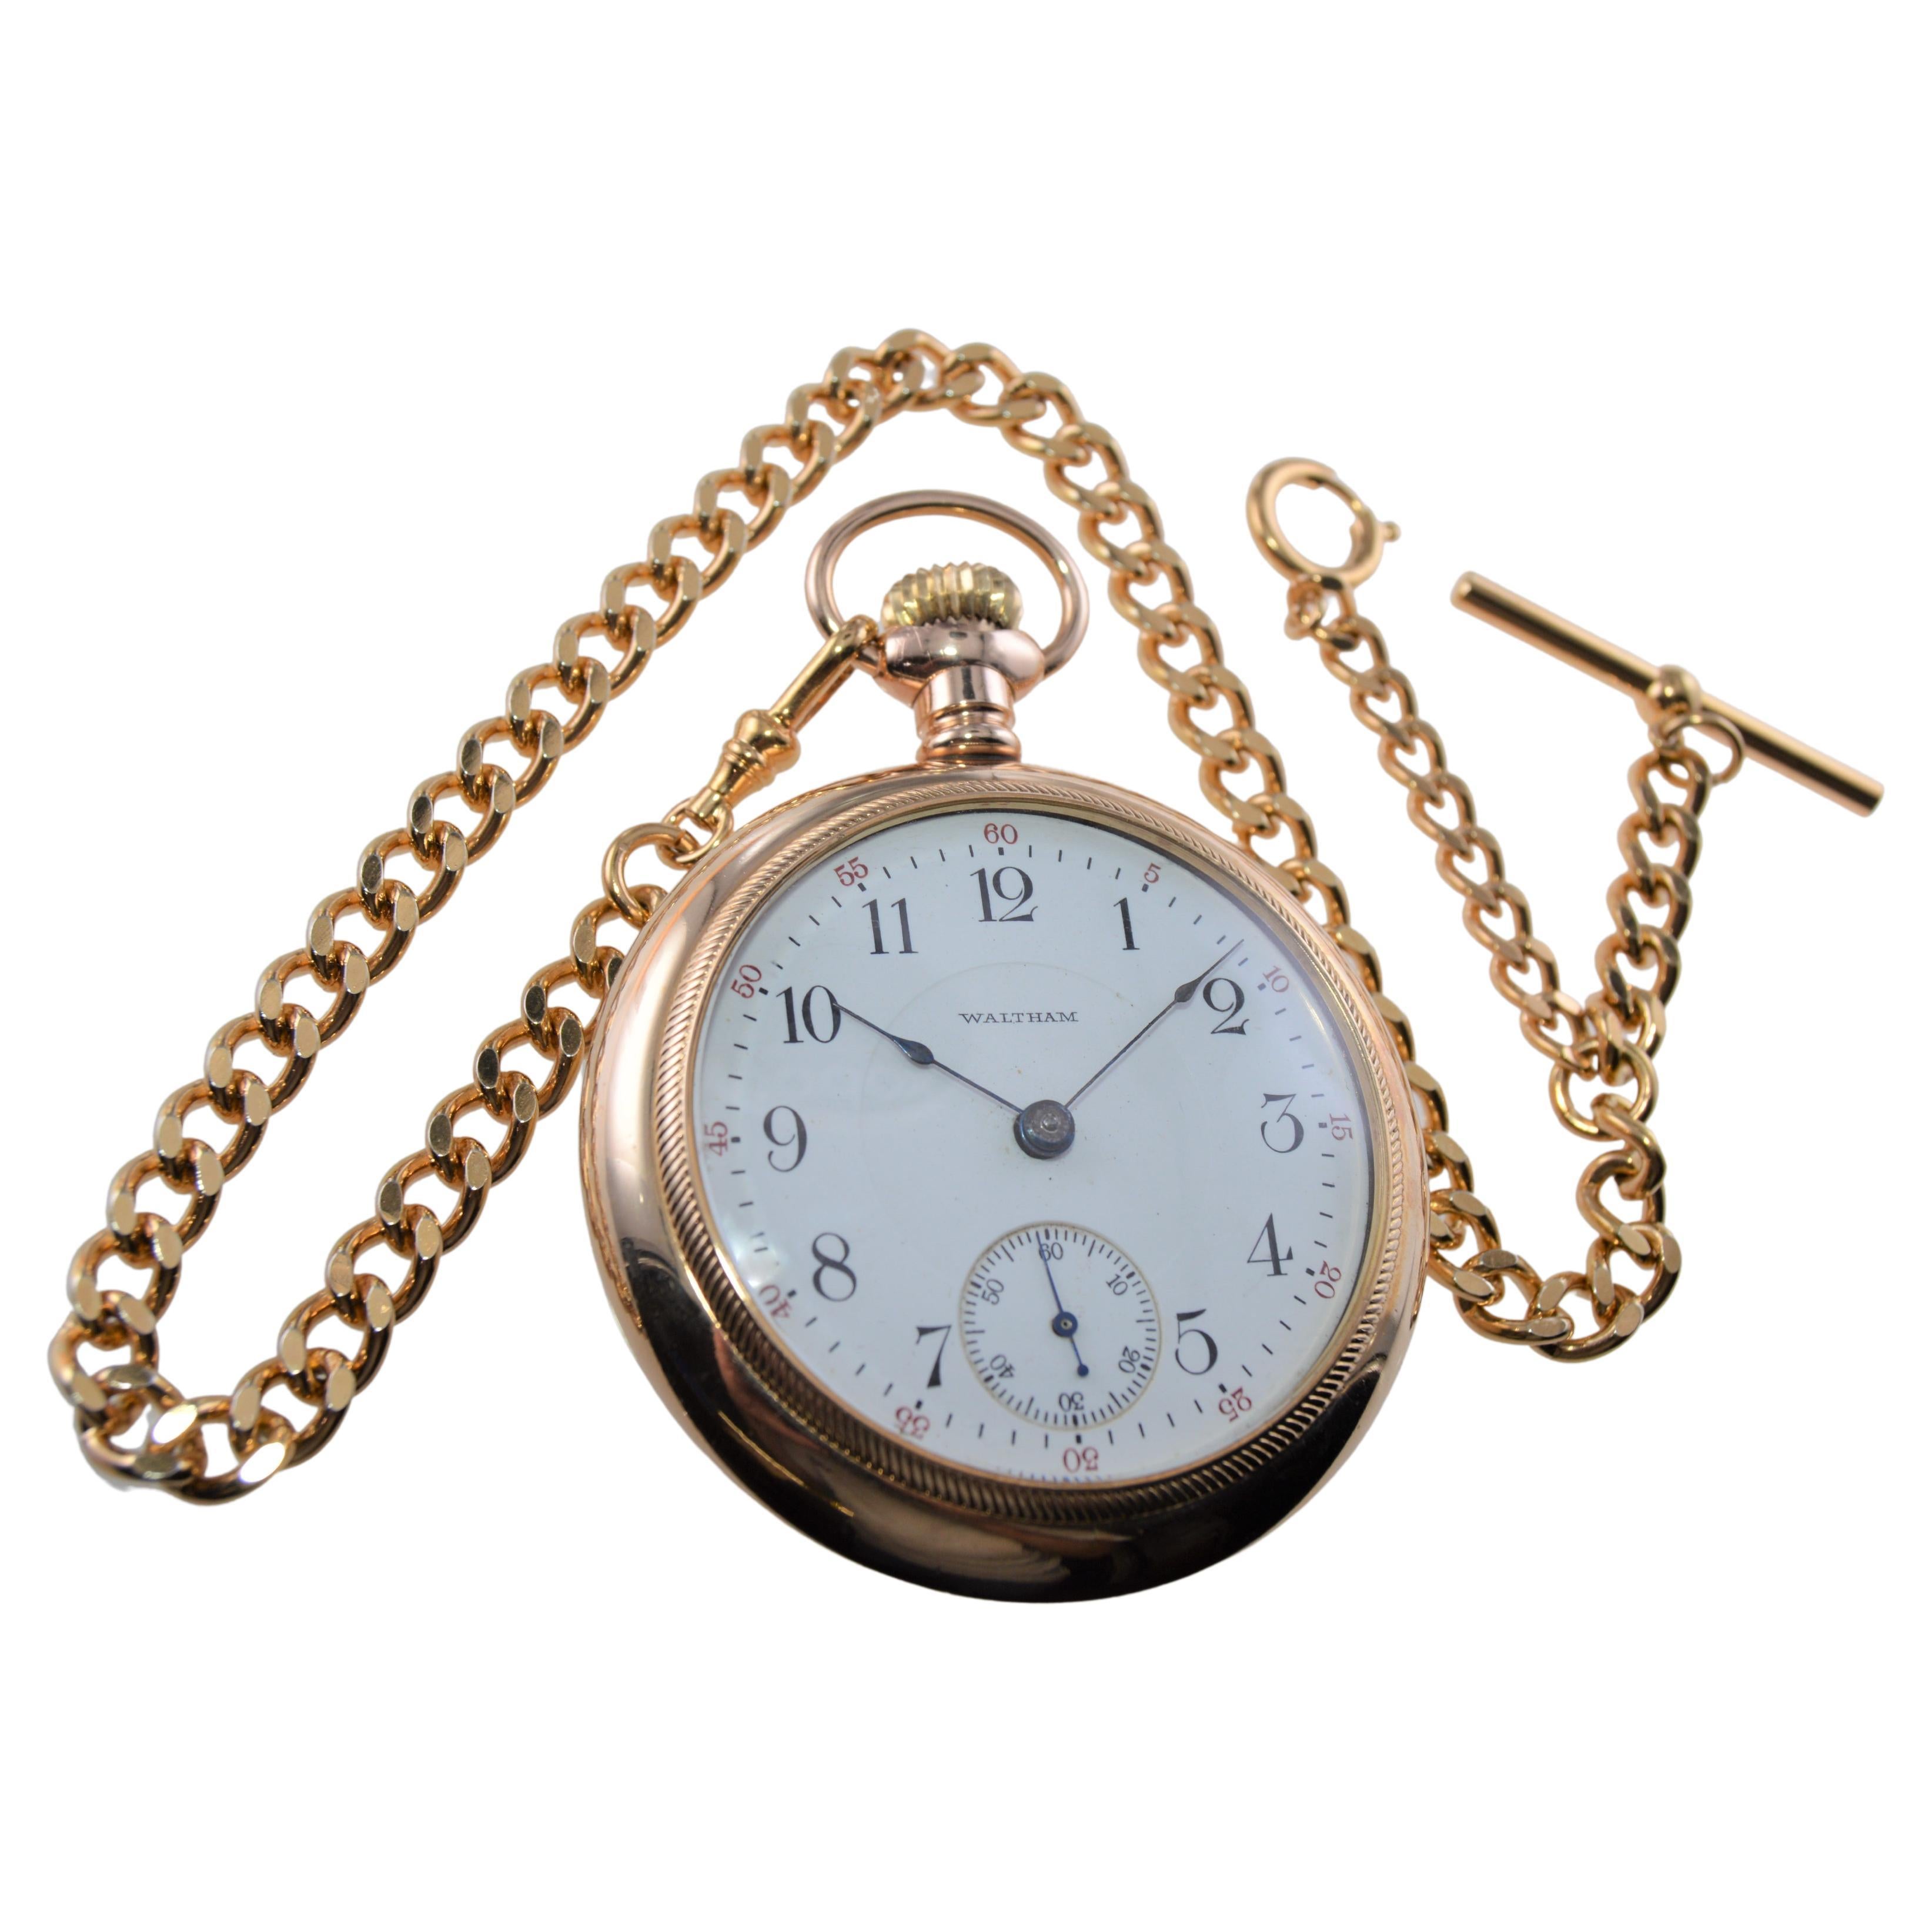 What is a pocket watch chain called?